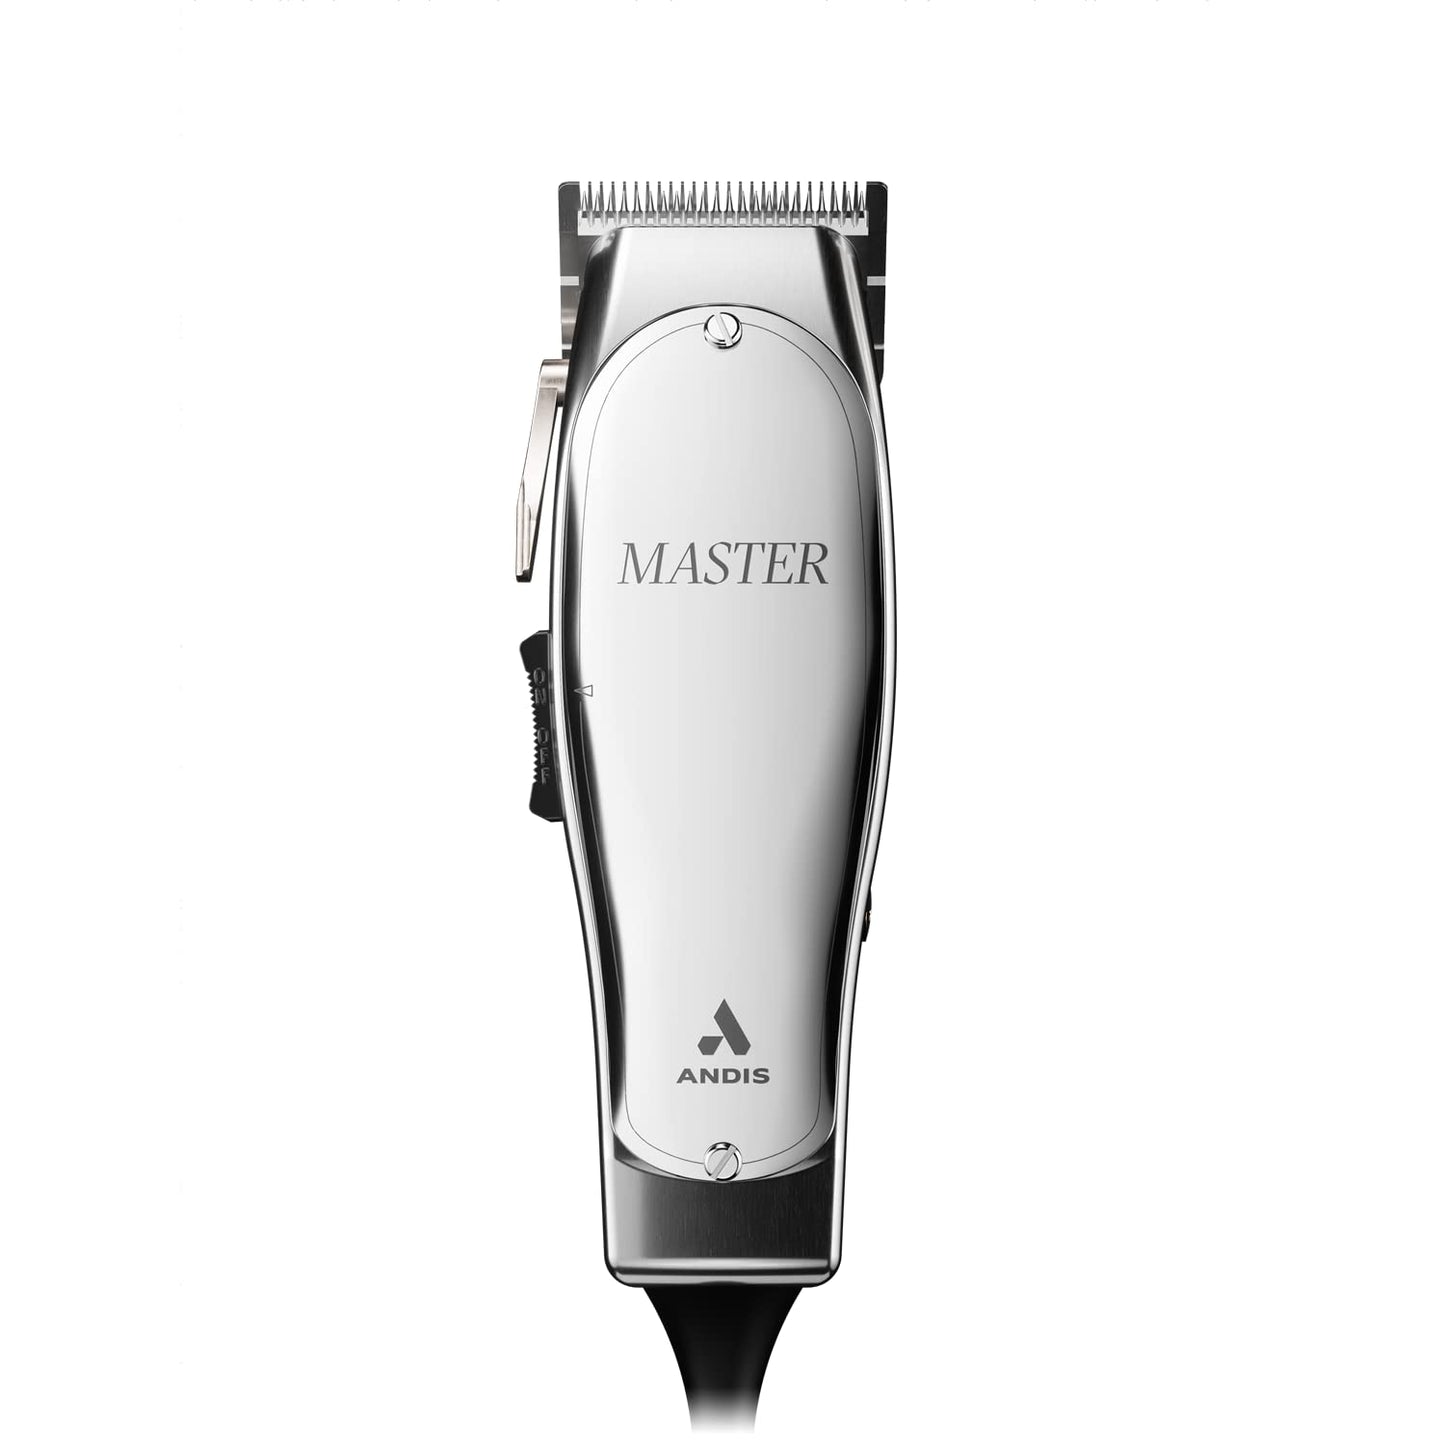 Andis Master Hair Clipper corded